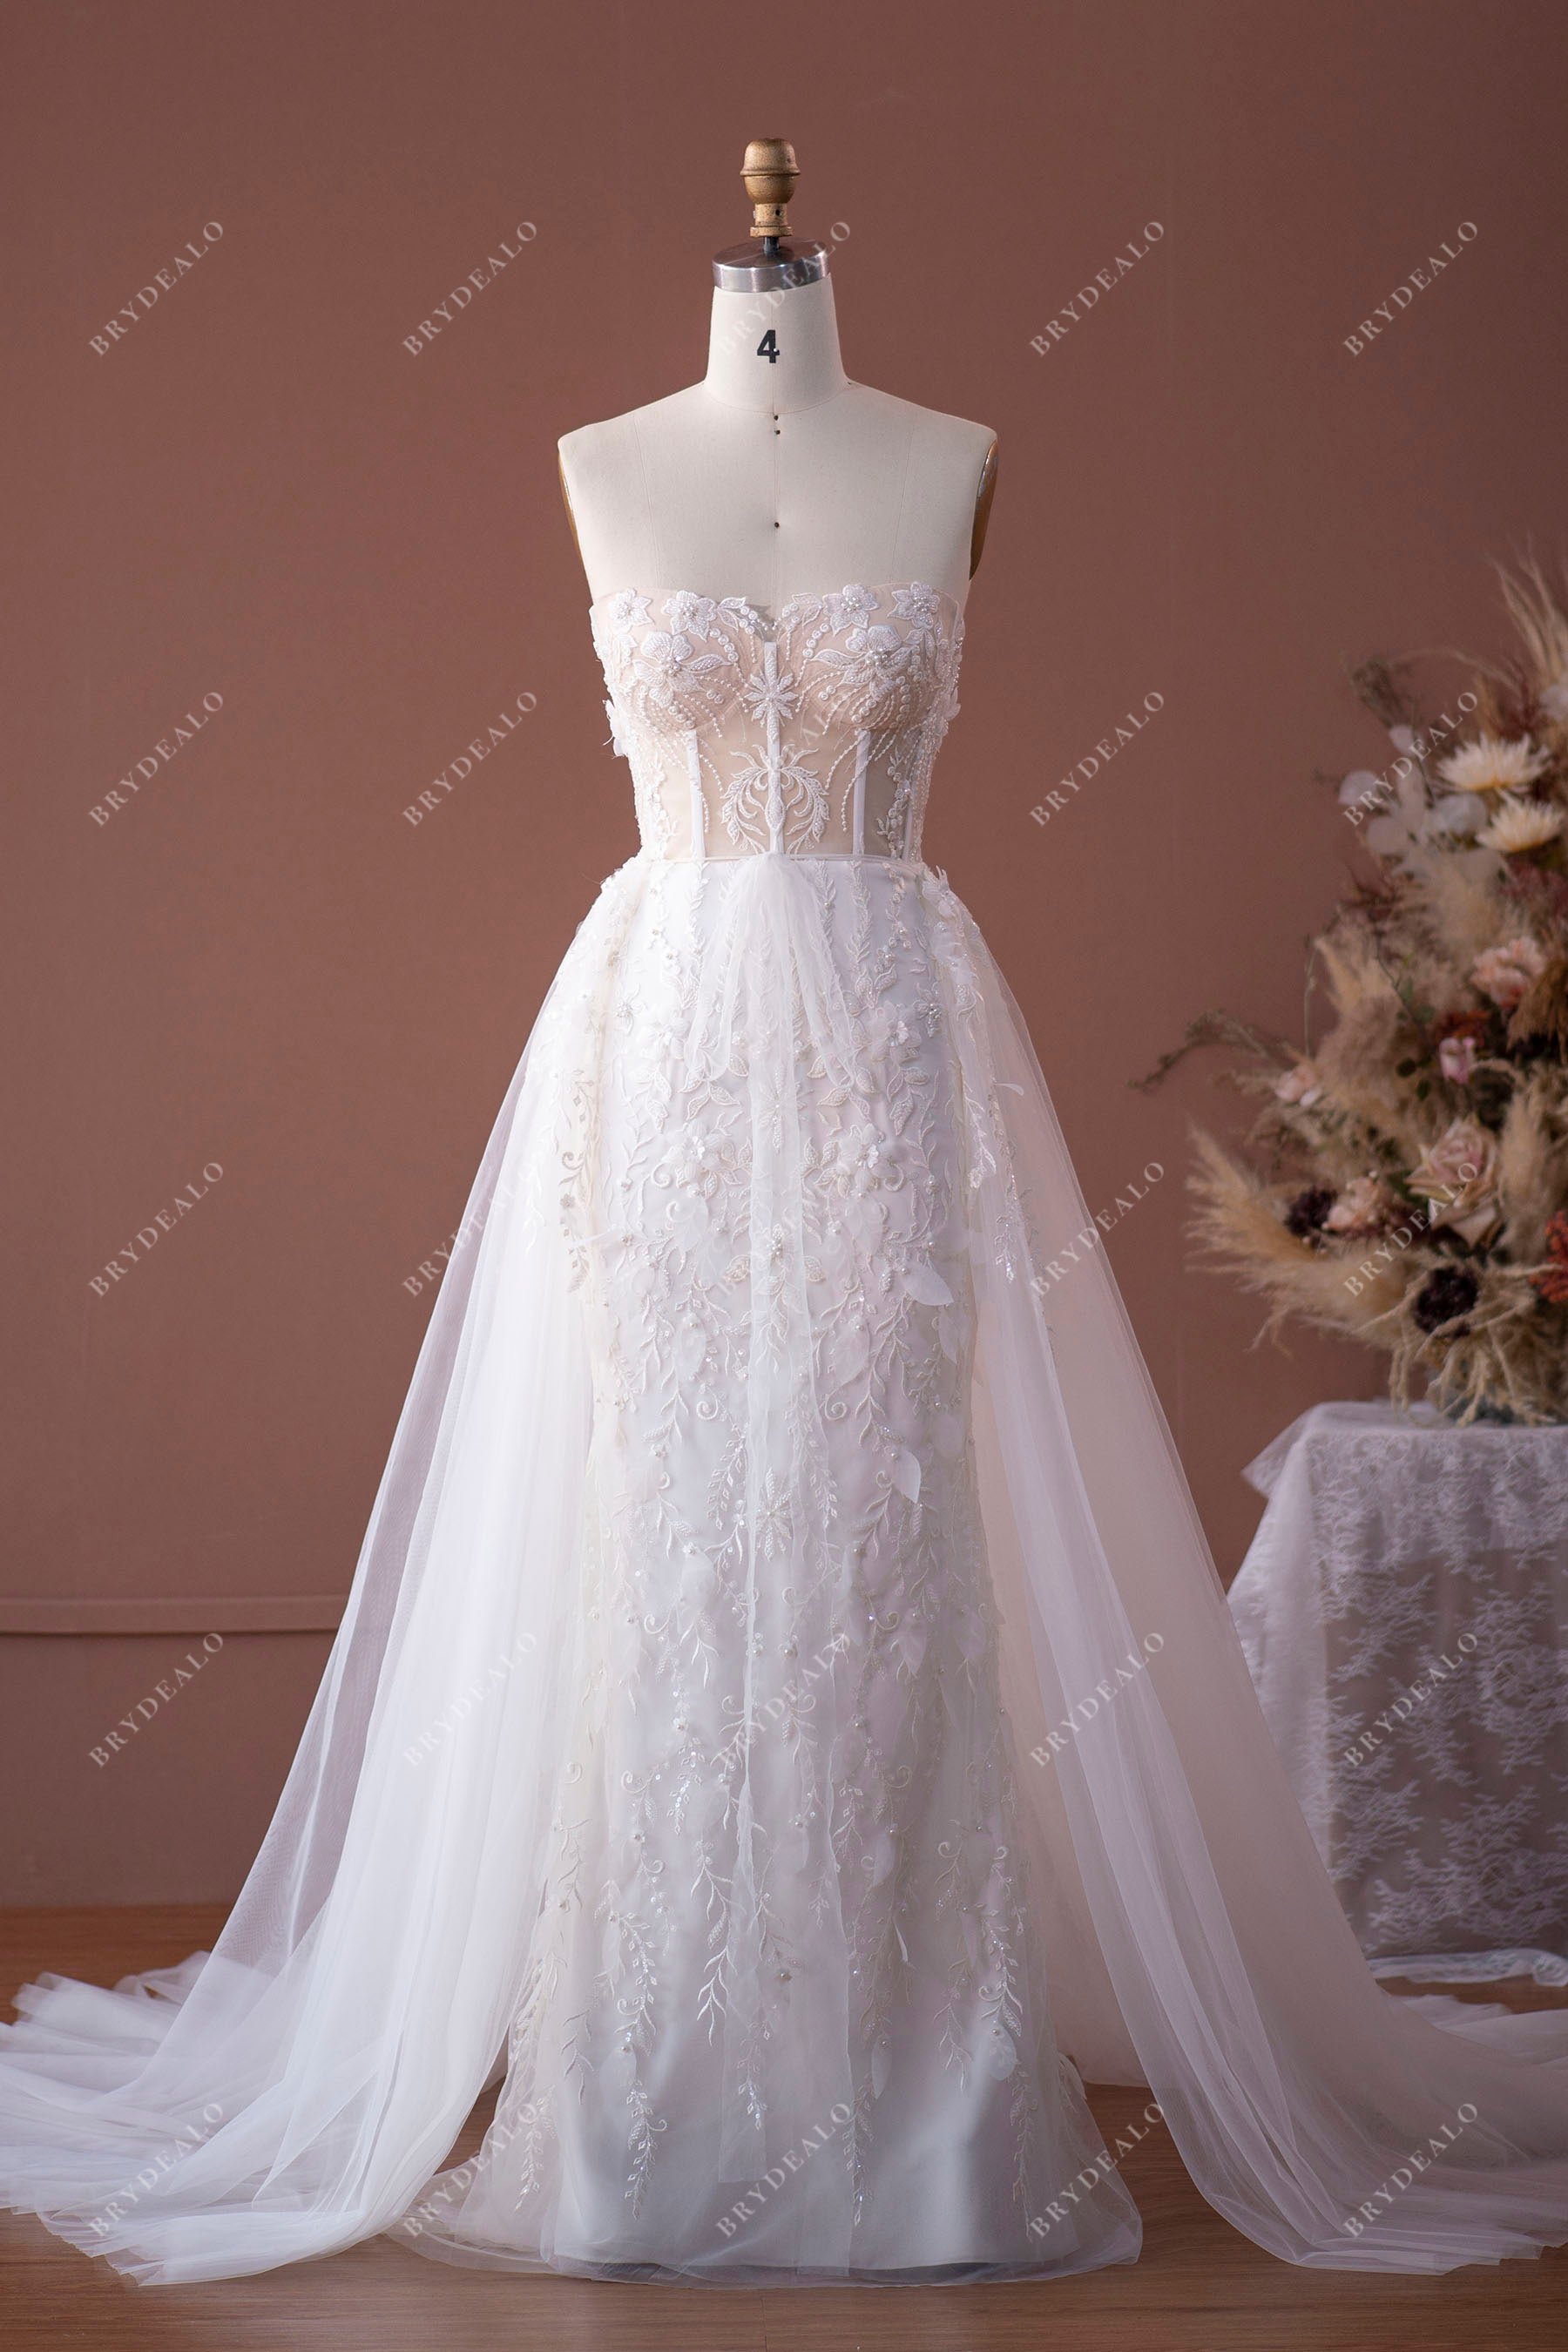 Flower Corset Bridal Gown with Plump Tulle Overskirt